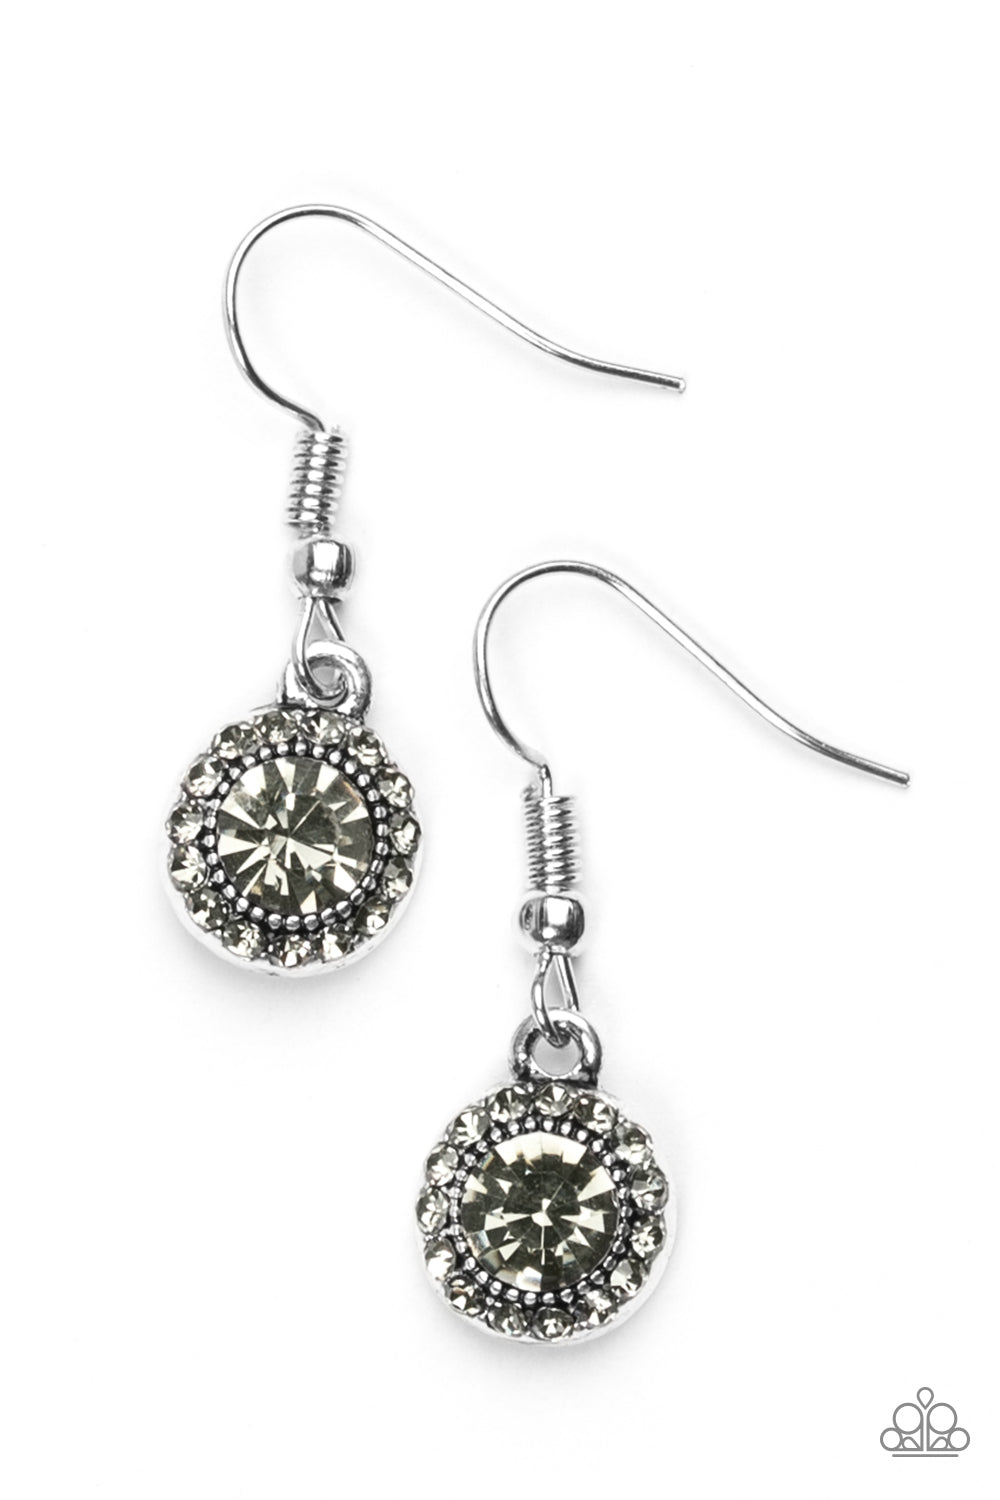 Paparazzi Accessories Born To BEAM Wild - Silver Earrings 